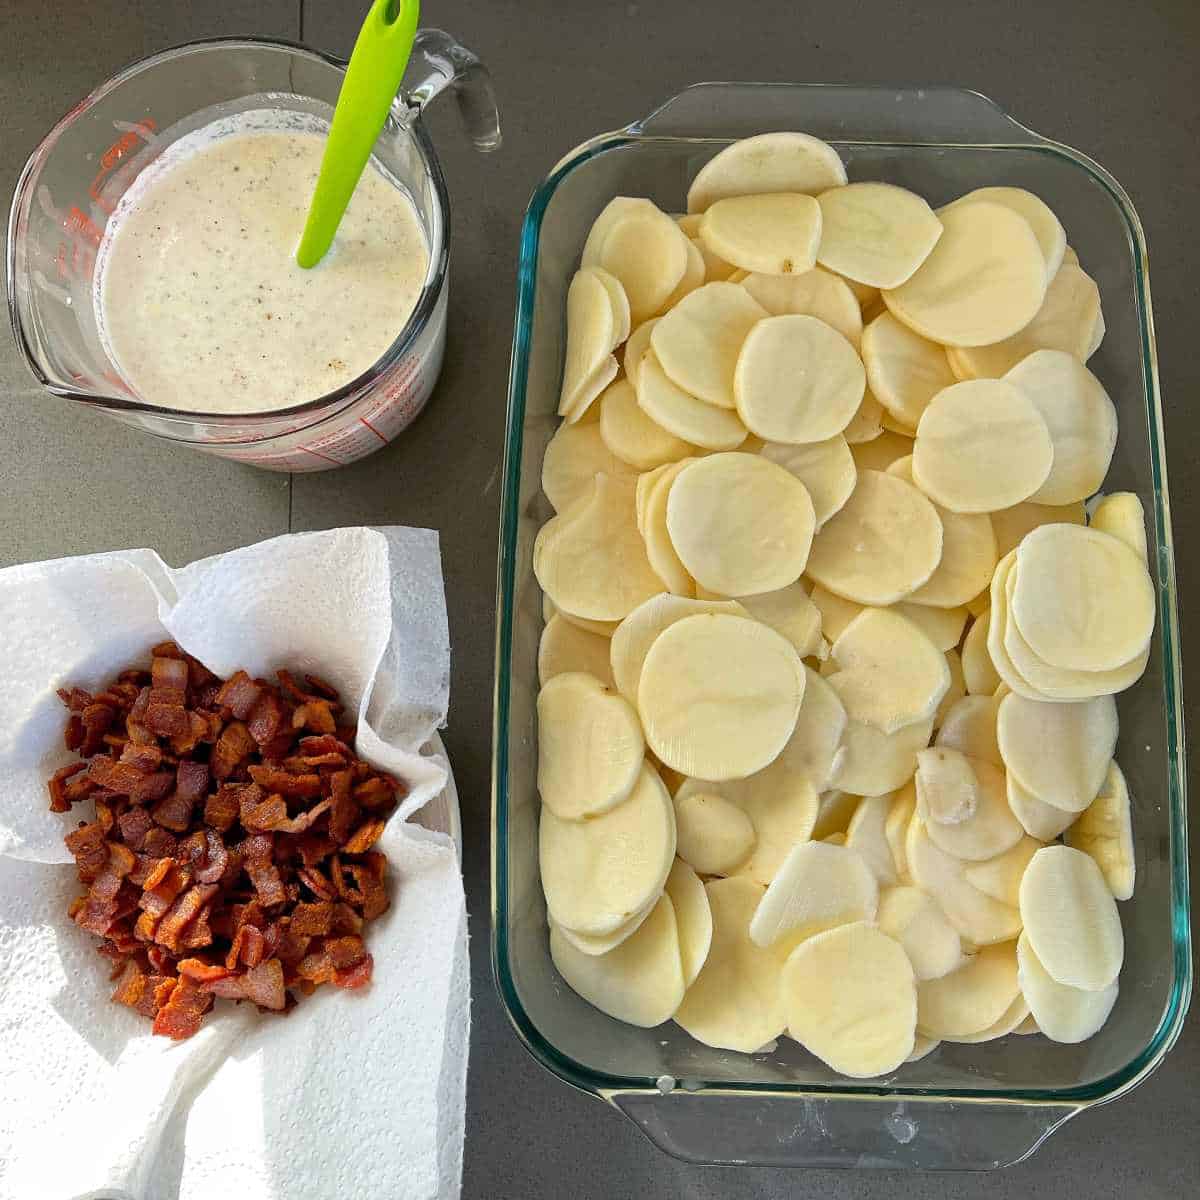 Cooked bacon pieces, uncooked sliced potatoes and the creamy, cheesy sauce for bacon and potato bake